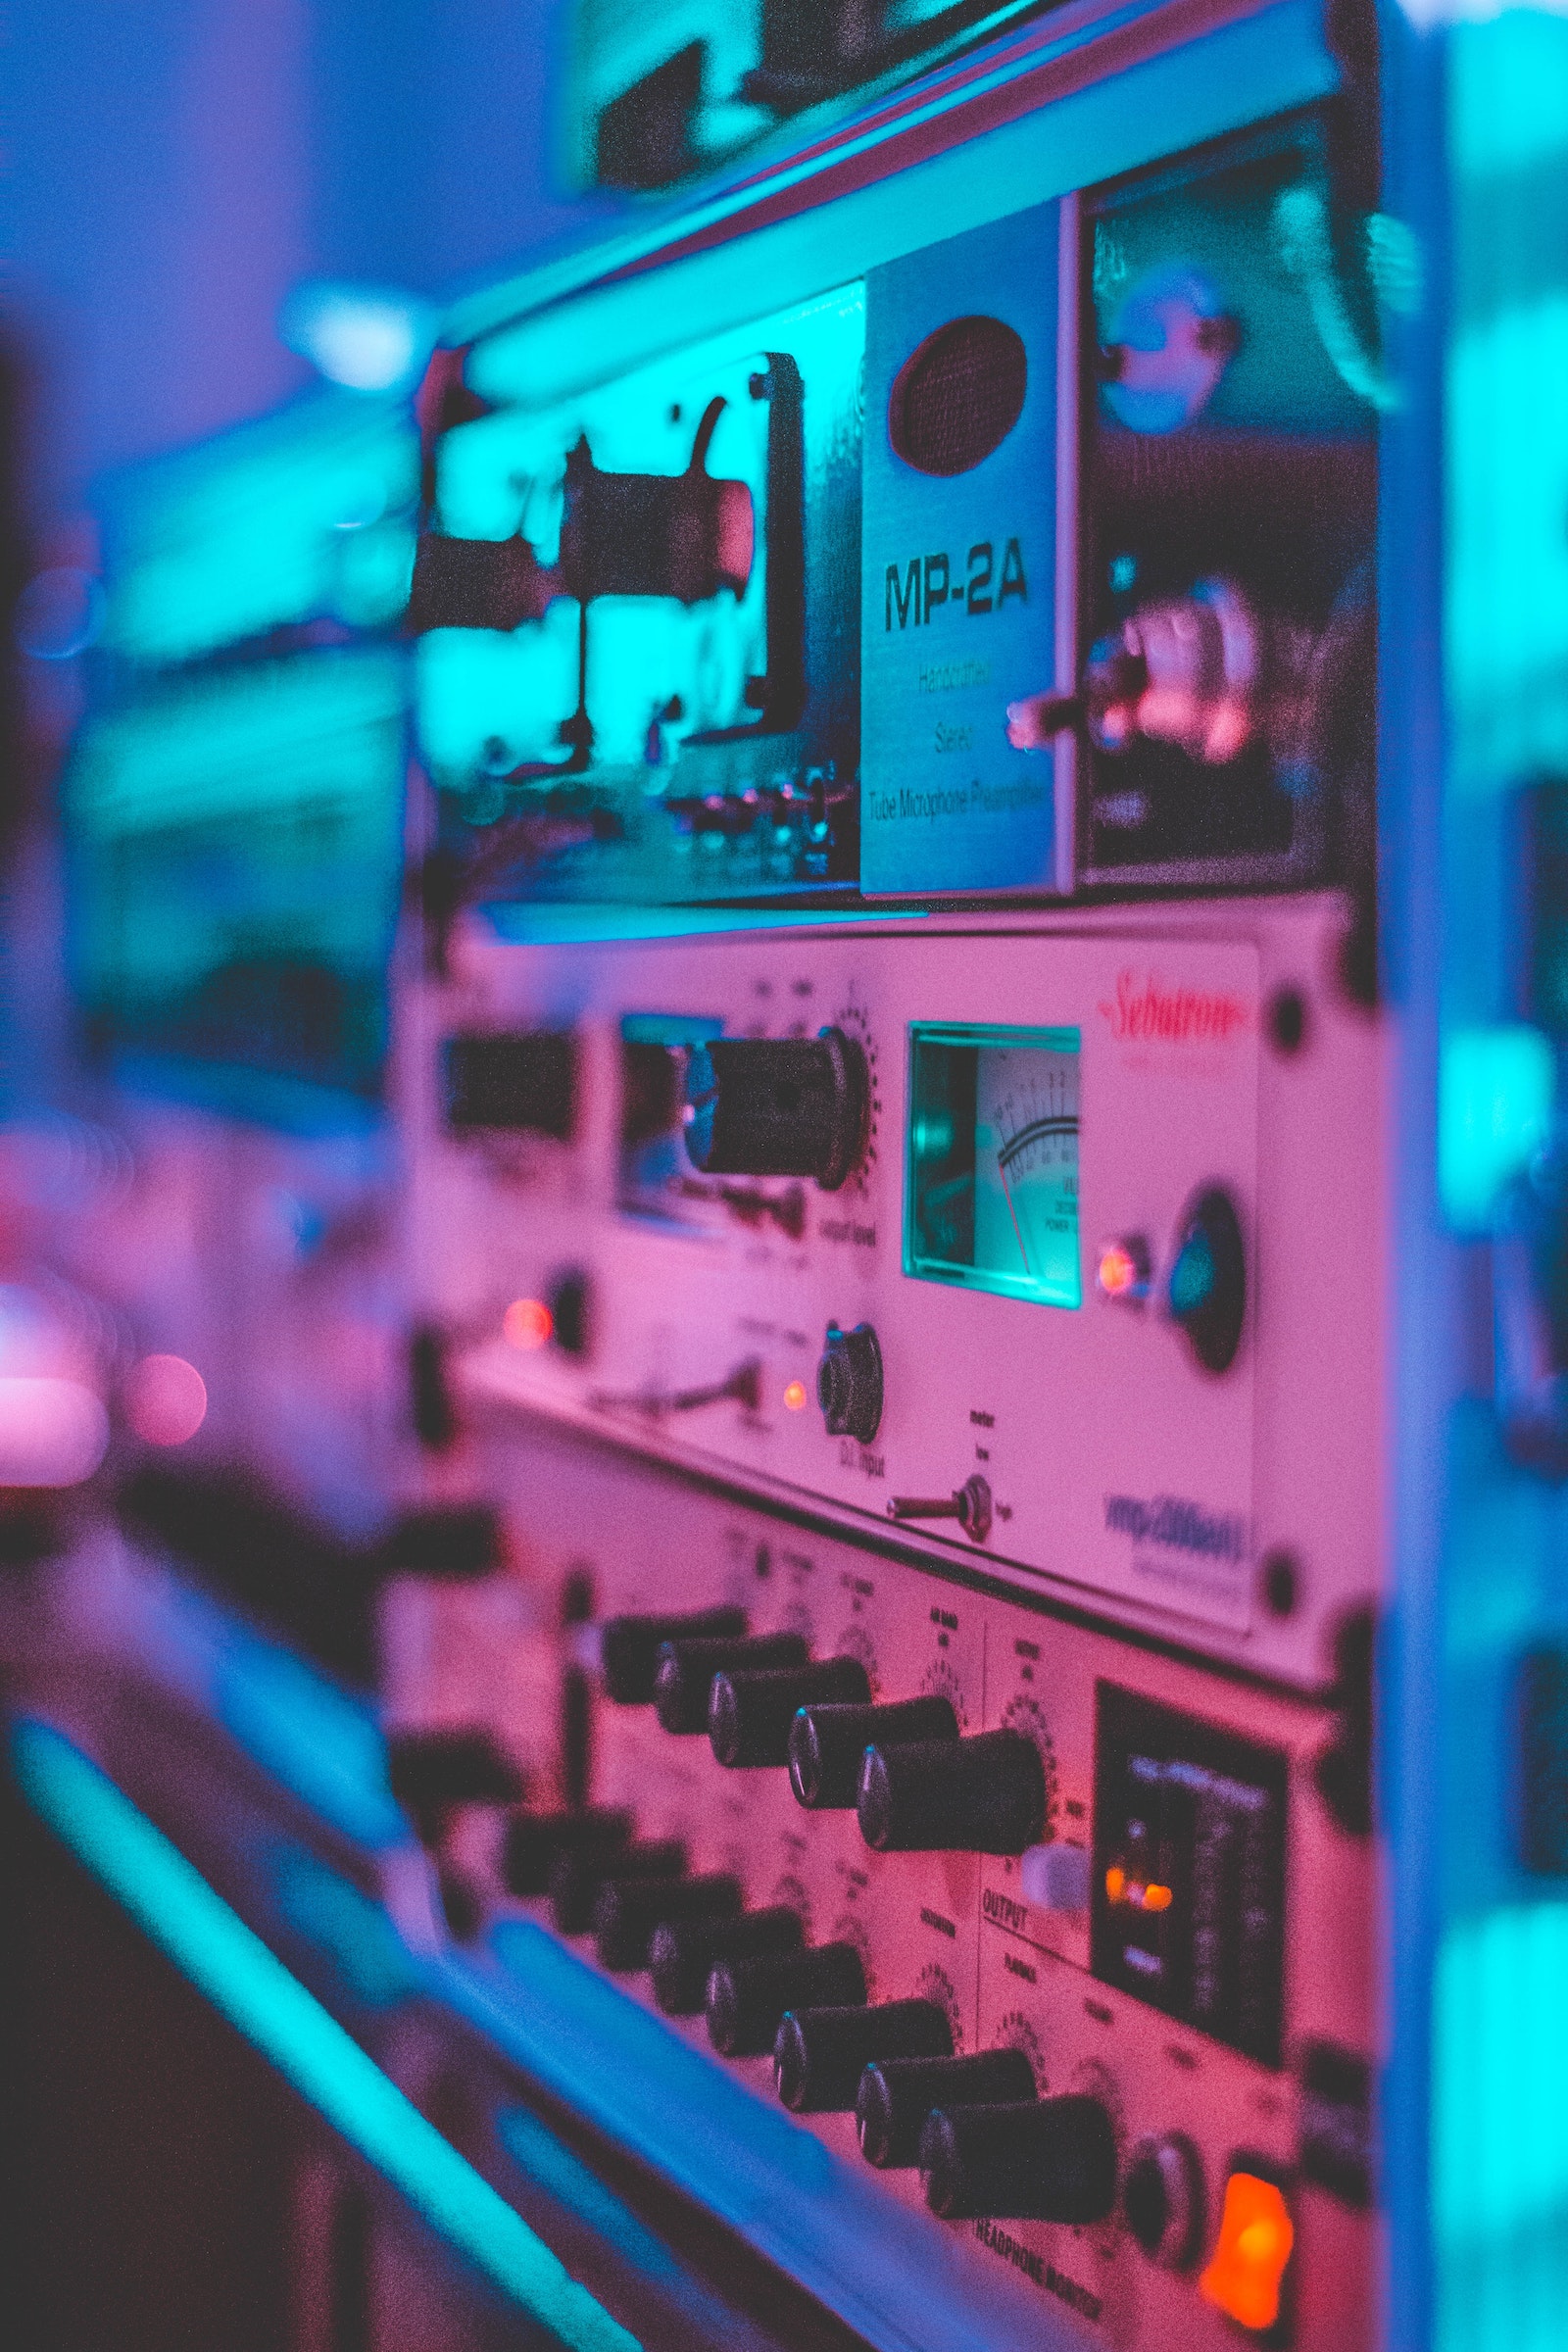 A collection of audio processing units in studio setting with a pink to blue neon light gradient.